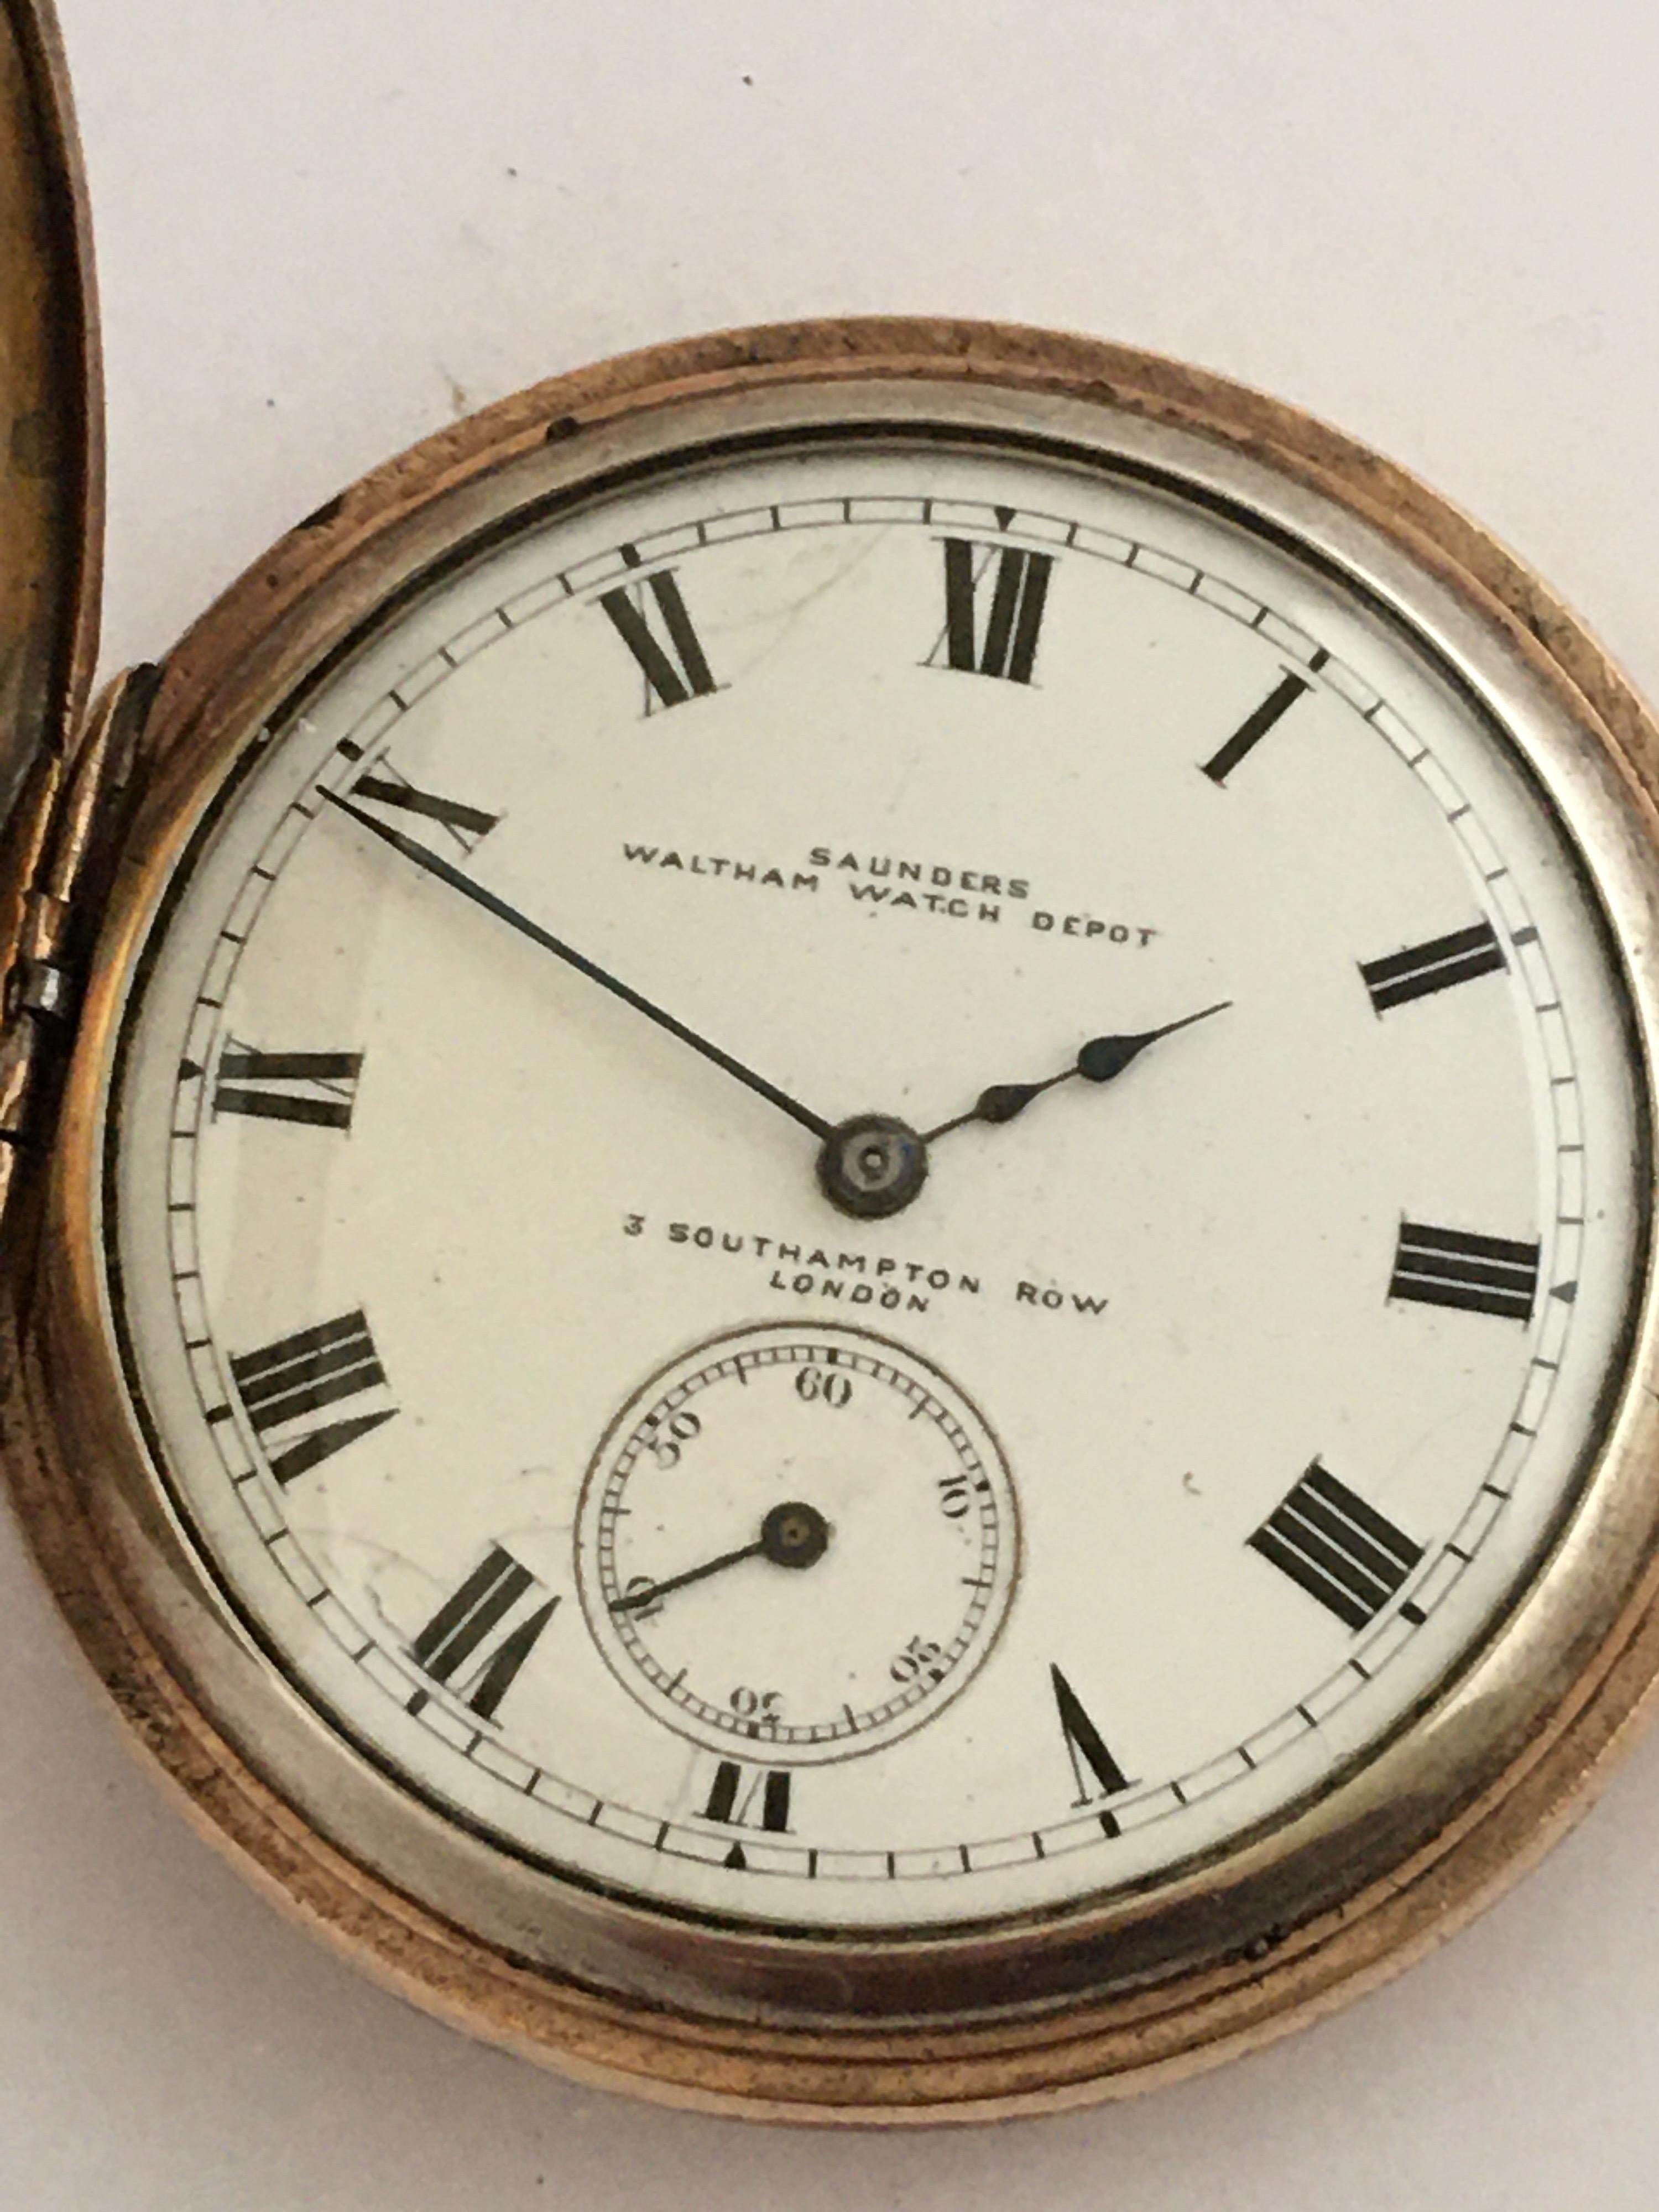 This beautiful keyless gold plated Waltham half hunter Pocket watch is working and ticking nicely. The gold plated watch case is tarnished as shown. Visible crack and chipped on the enamel dial.

Please study the images carefully as form part of the